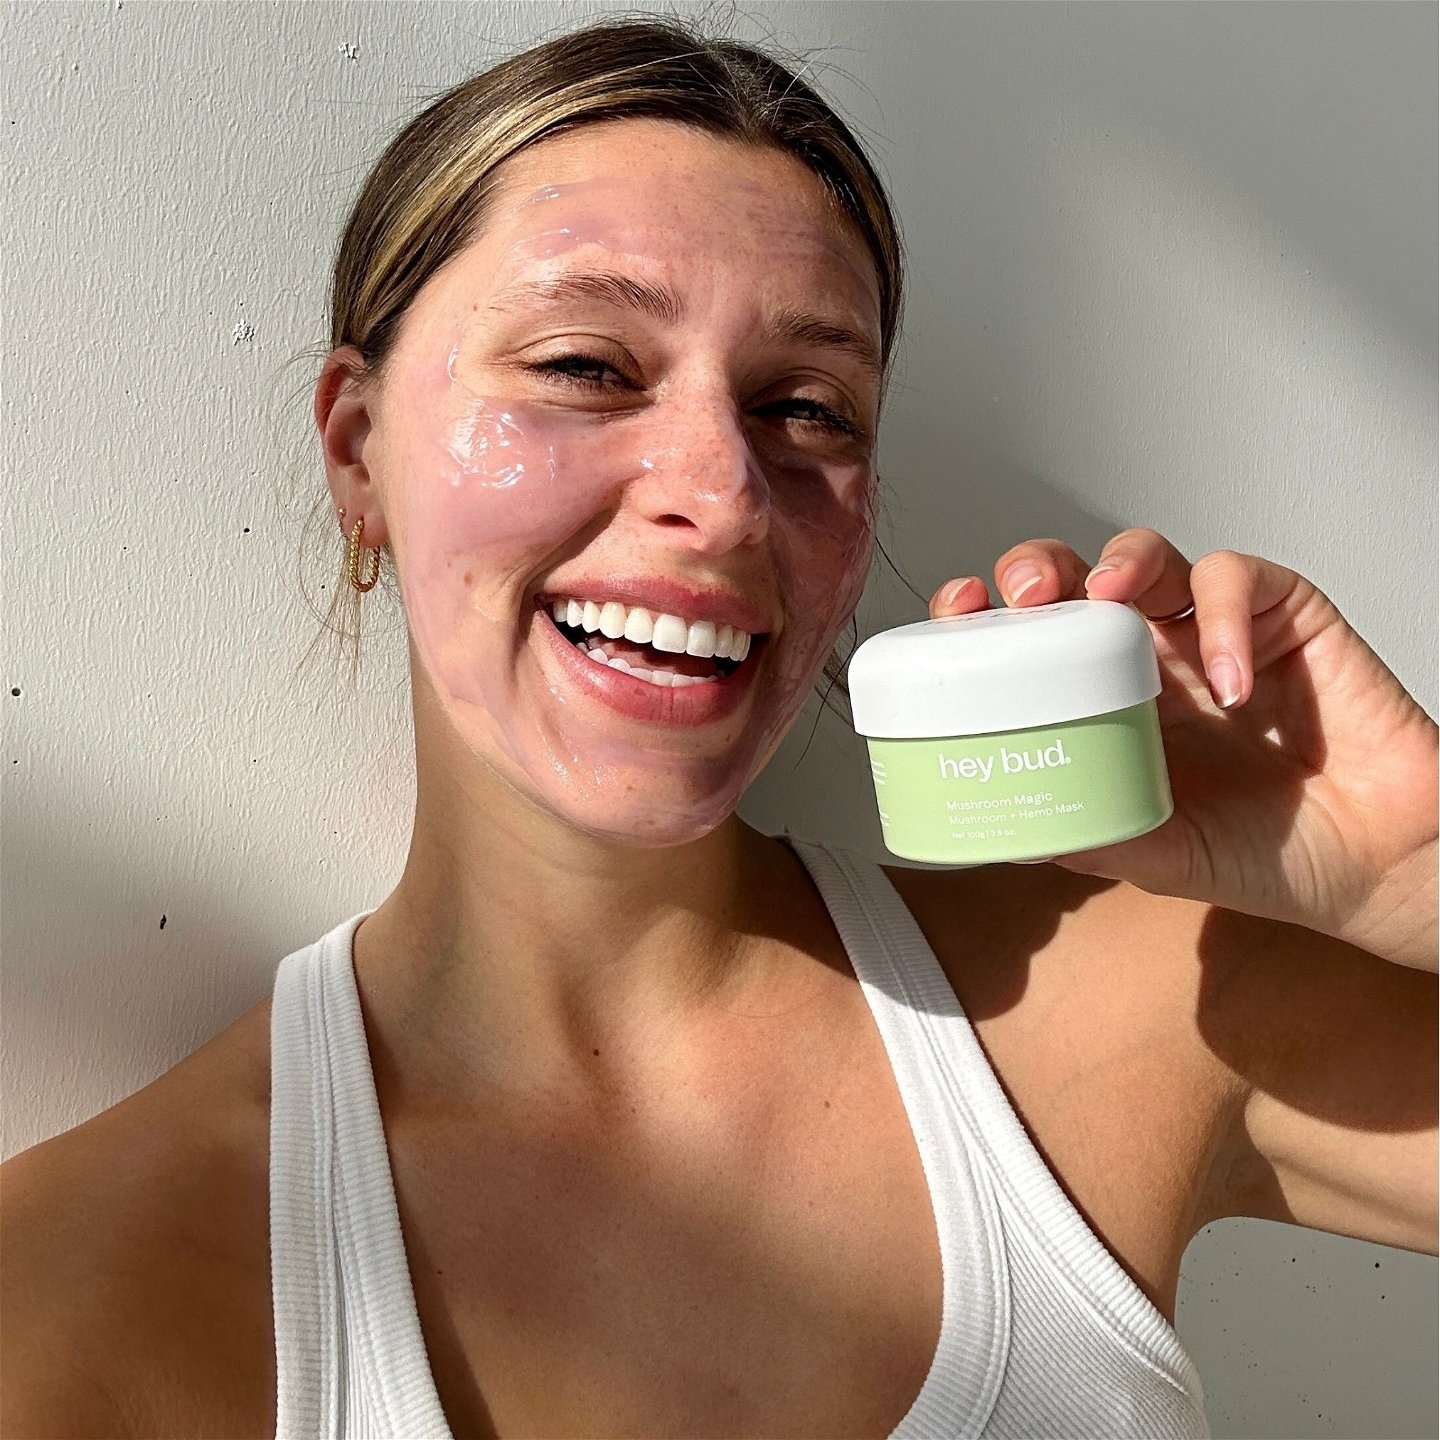 Woman with a skincare mask holding a Hey Bud skincare product